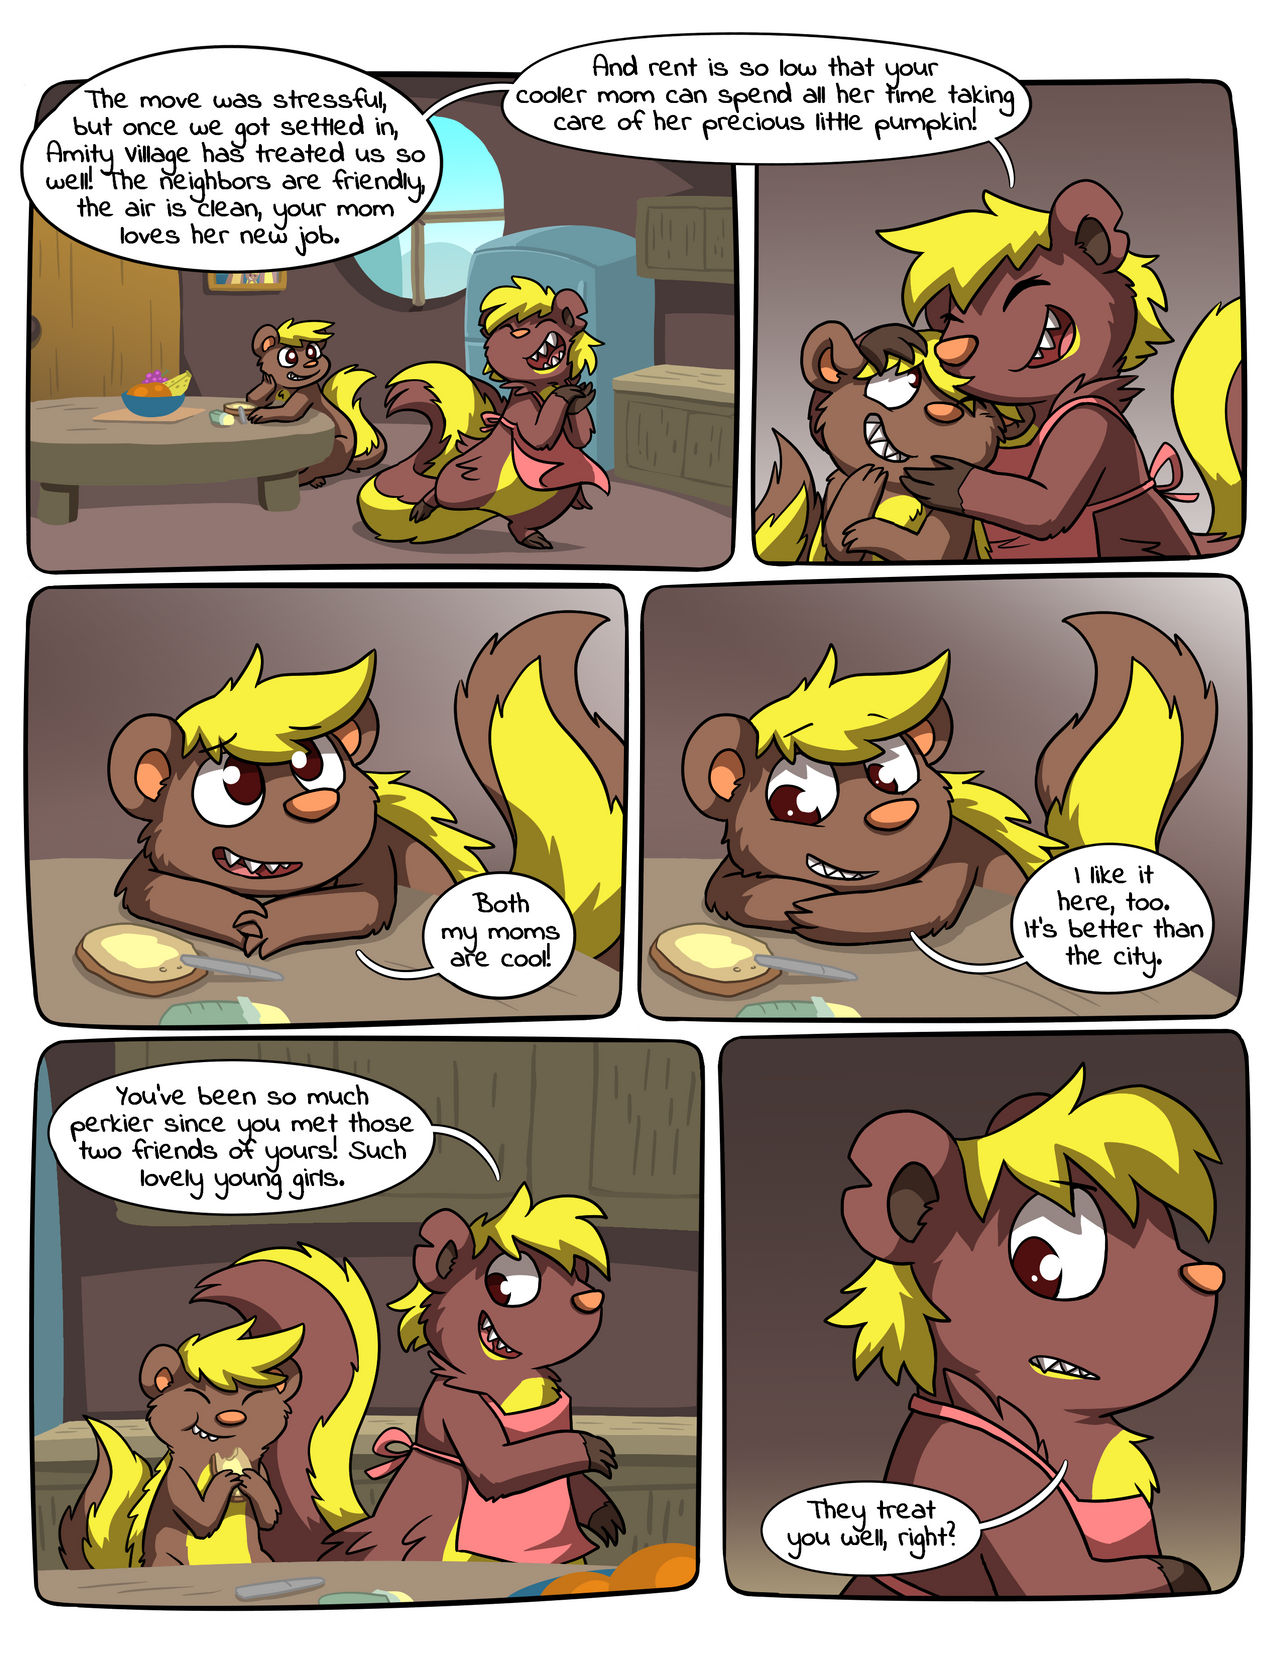 little_lapses__chapter_1__page_8_by_saltnpepperbunny_deoh8gg-fullview.jpg